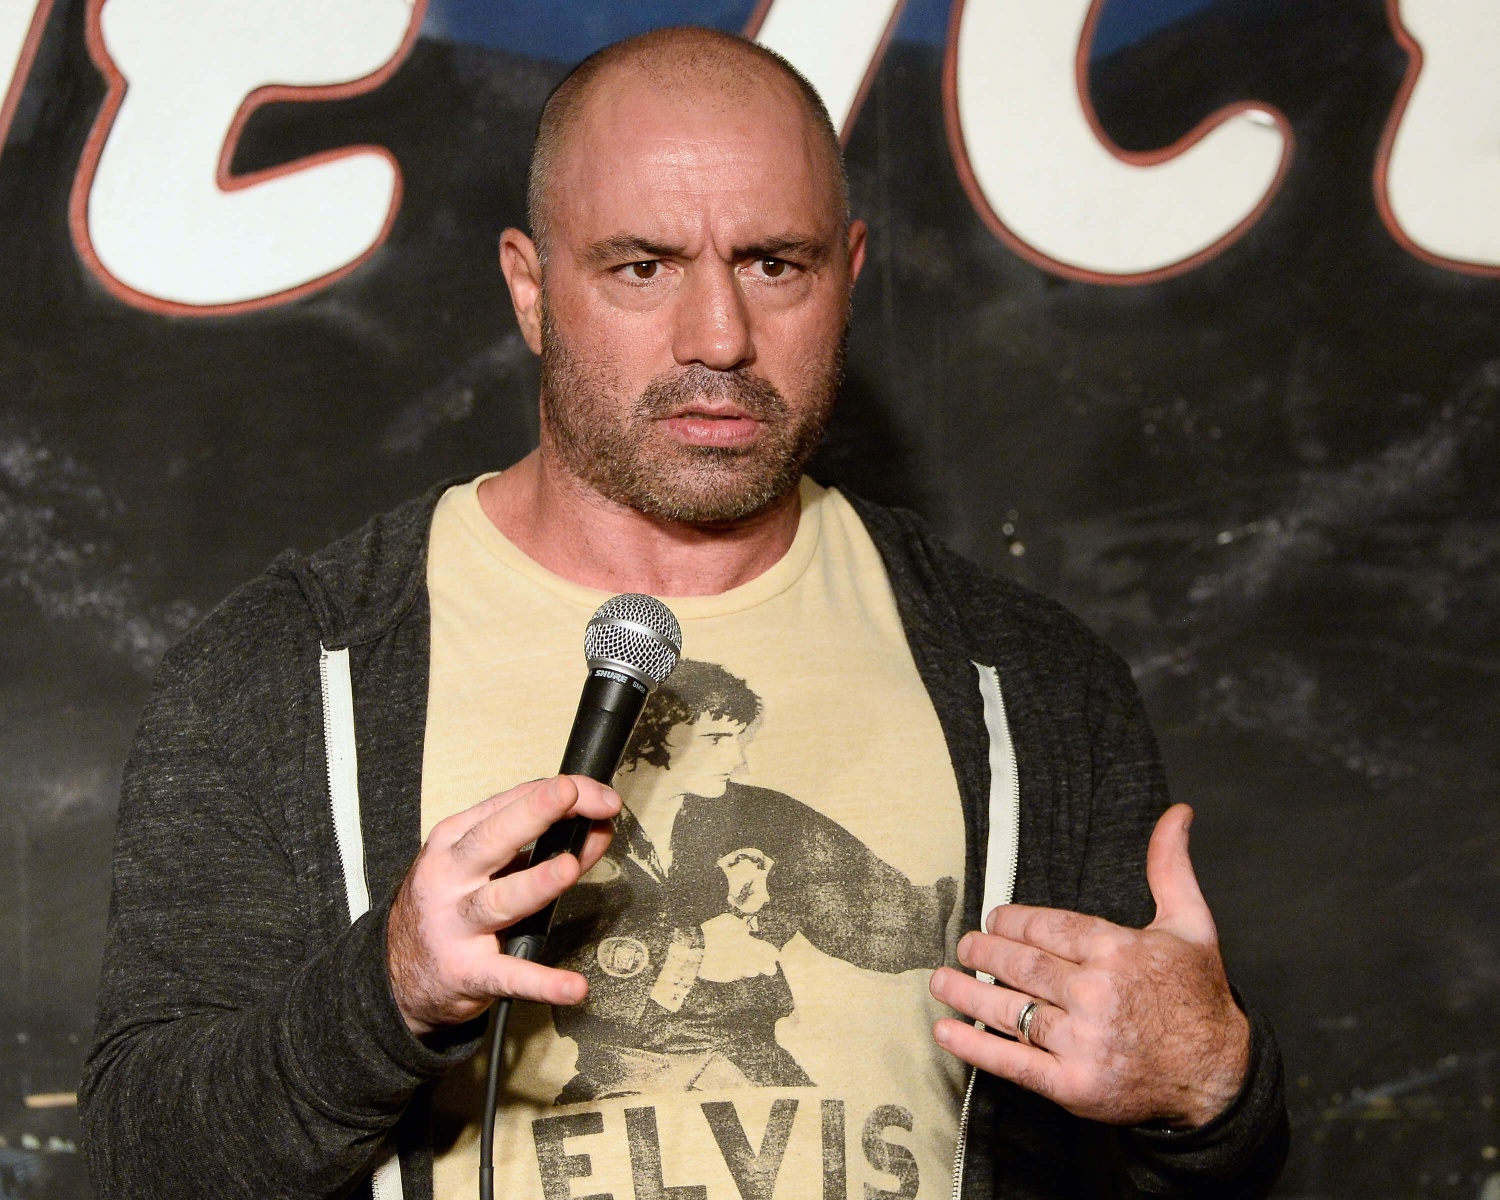 Comedian Joe Rogan performs during his appearance at The Ice House Comedy Club on August 21, 2014 in Pasadena, California. (Photo by Michael Schwartz/WireImage)